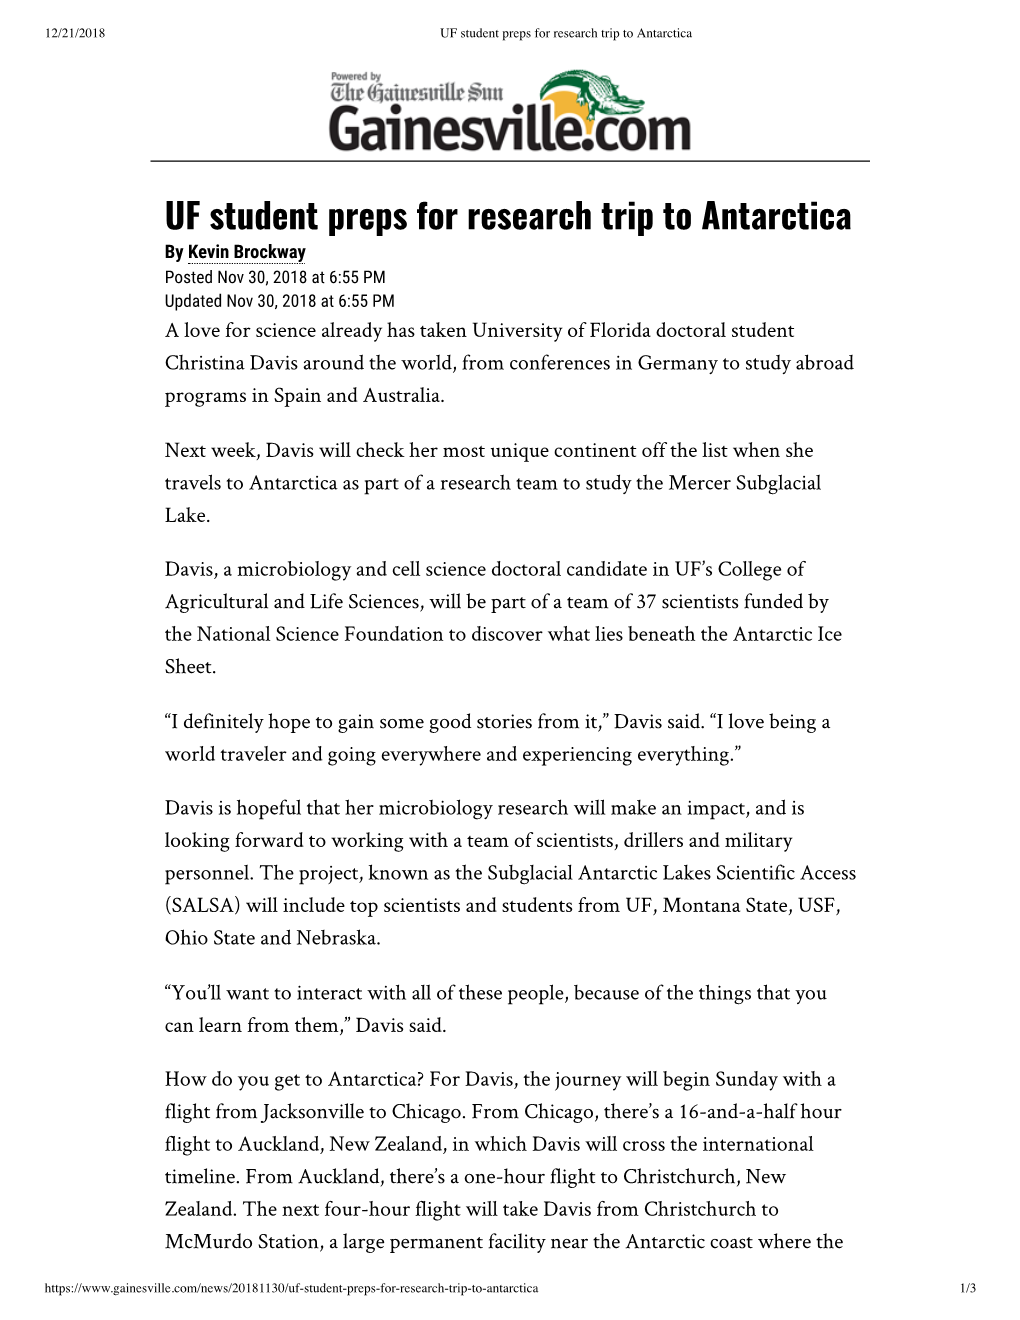 UF Student Preps for Research Trip to Antarctica